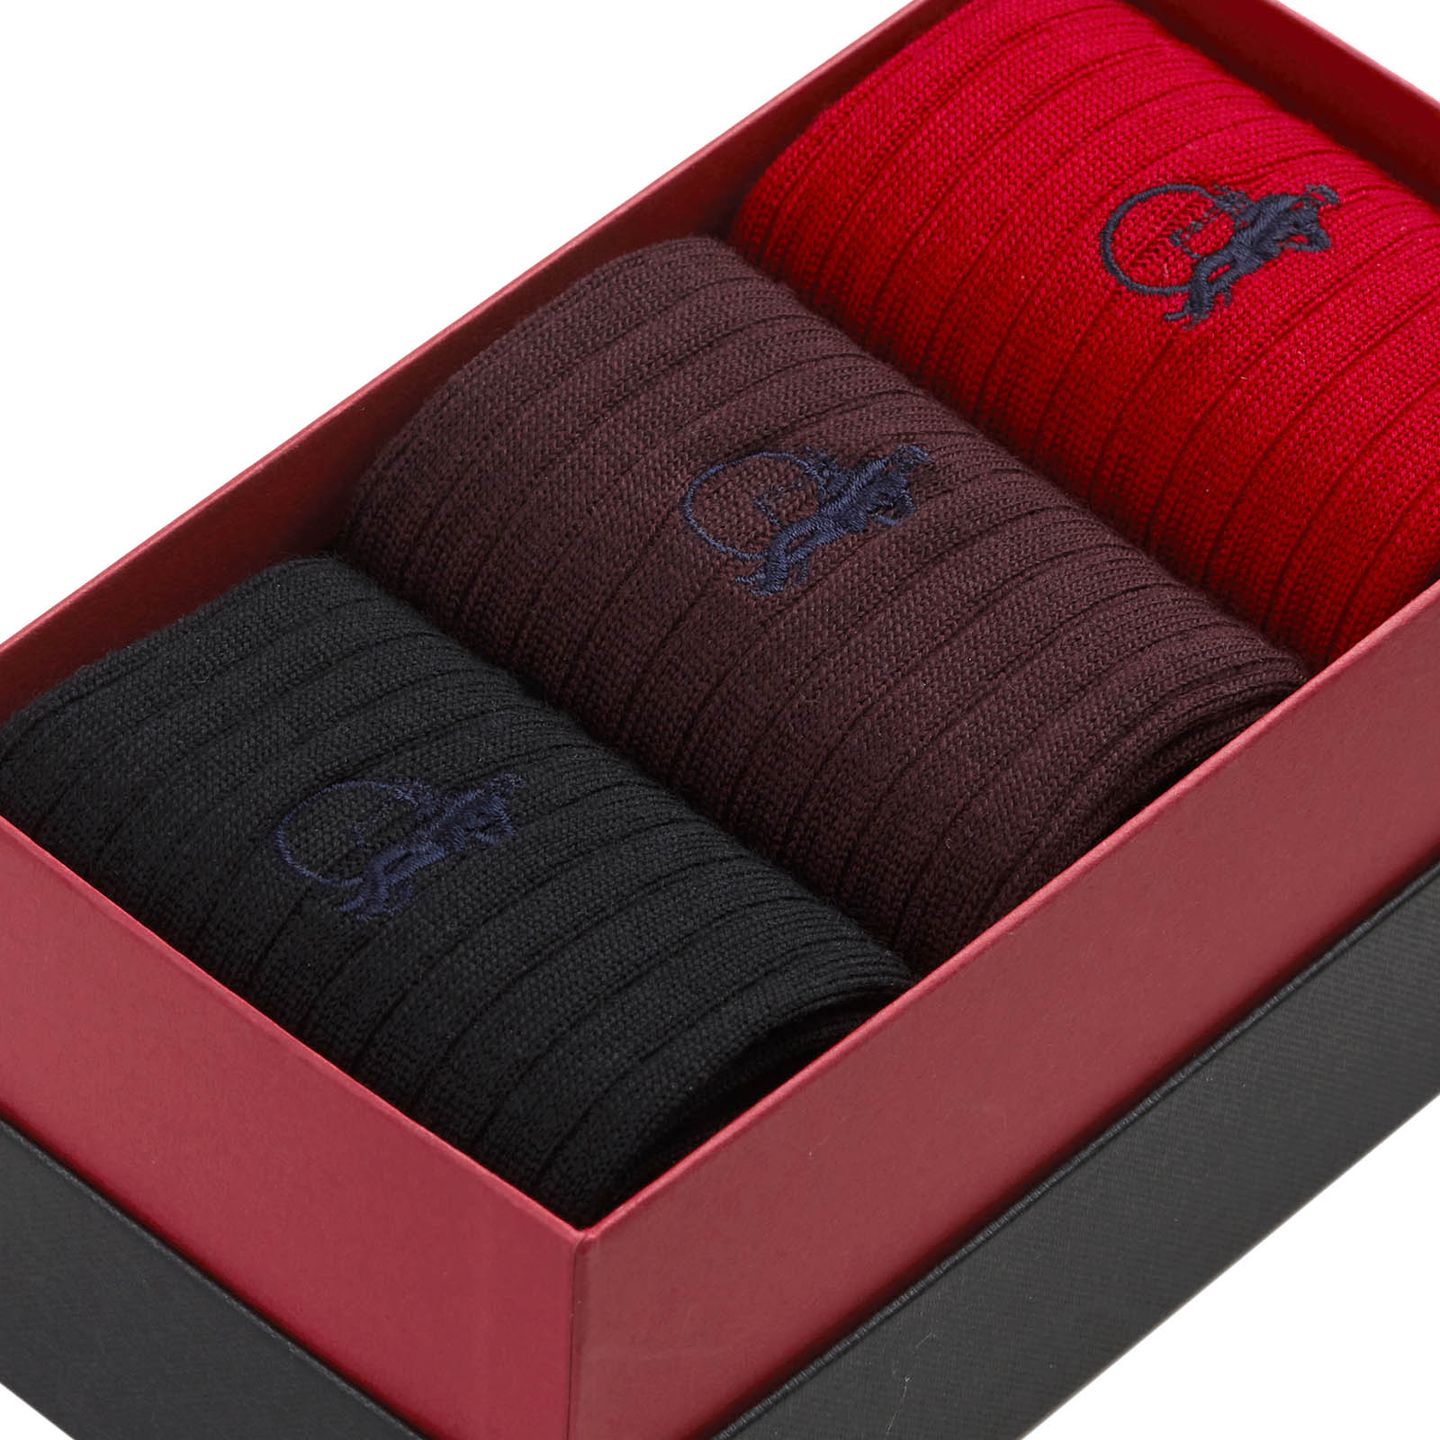 Merino mulberry trio collection with red, brown and black socks